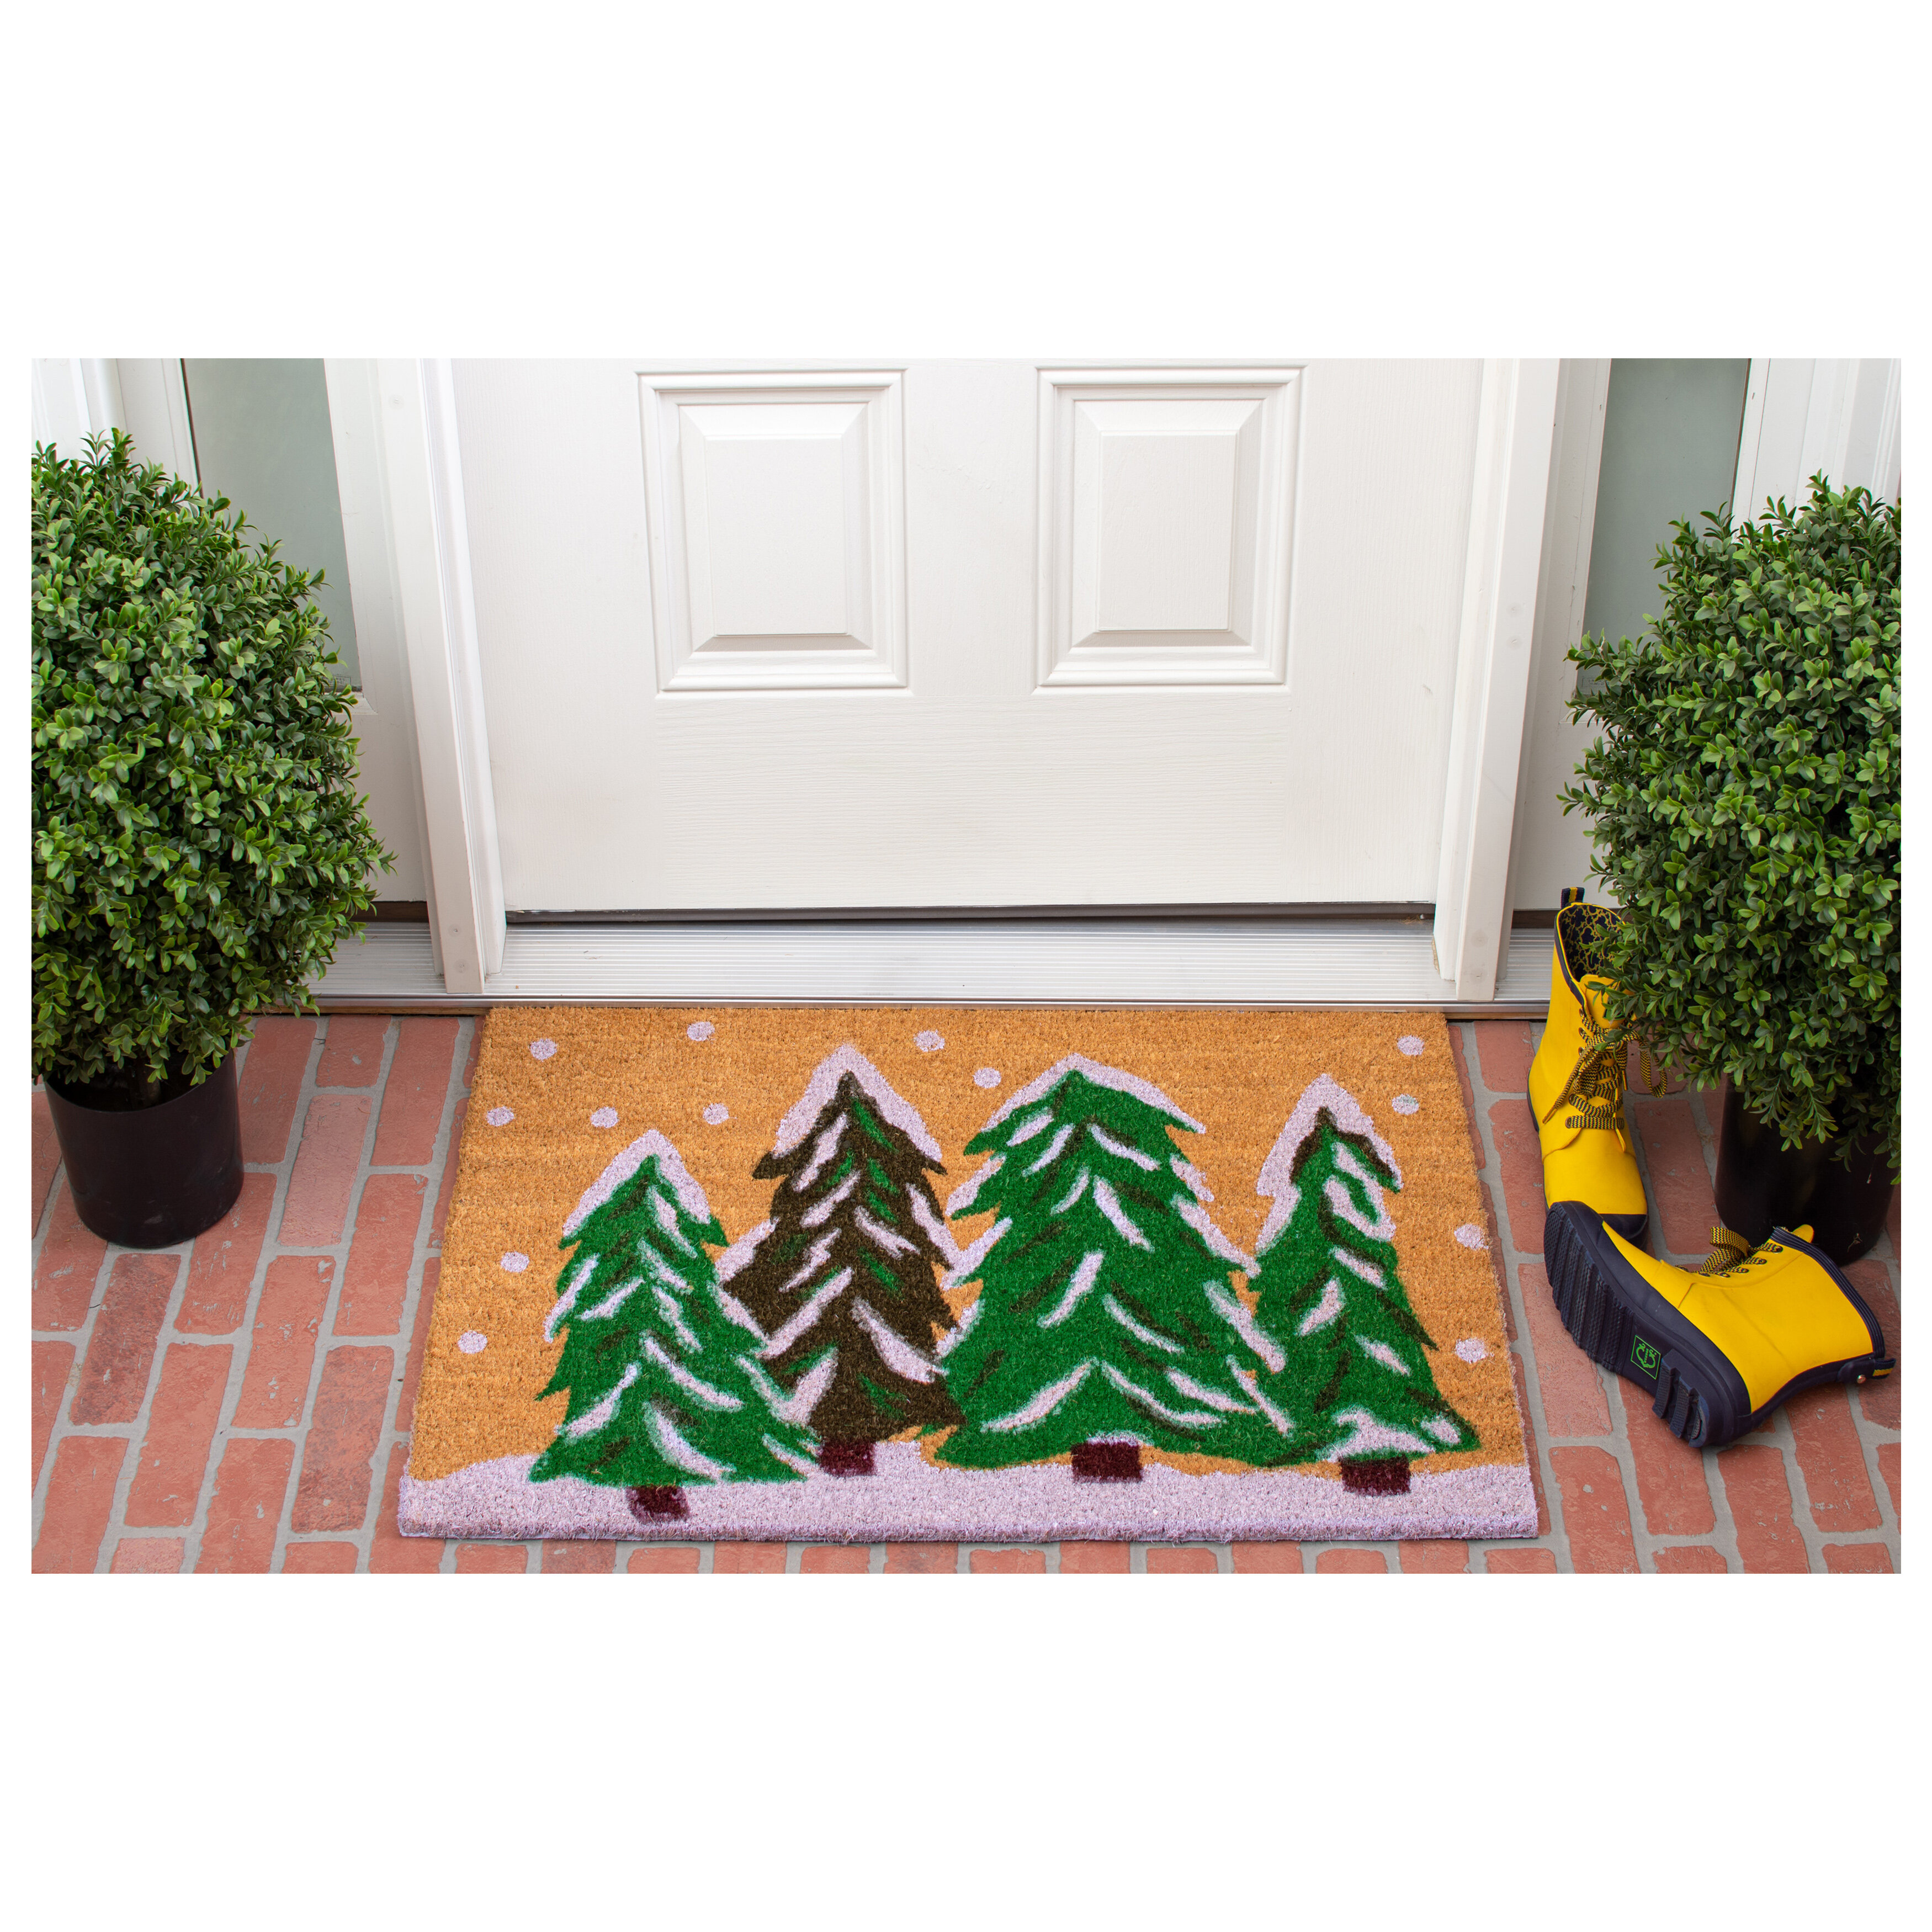 Christmas Door Mat Outdoor for Front Door Decorations , Red Buffalo Plaid  Snowflakes Merry Christmas Doormat,Winter Holiday Welcome Floor Mat Rug  Entryway for Front Porch Farmhouse Decor, 30 x 17 